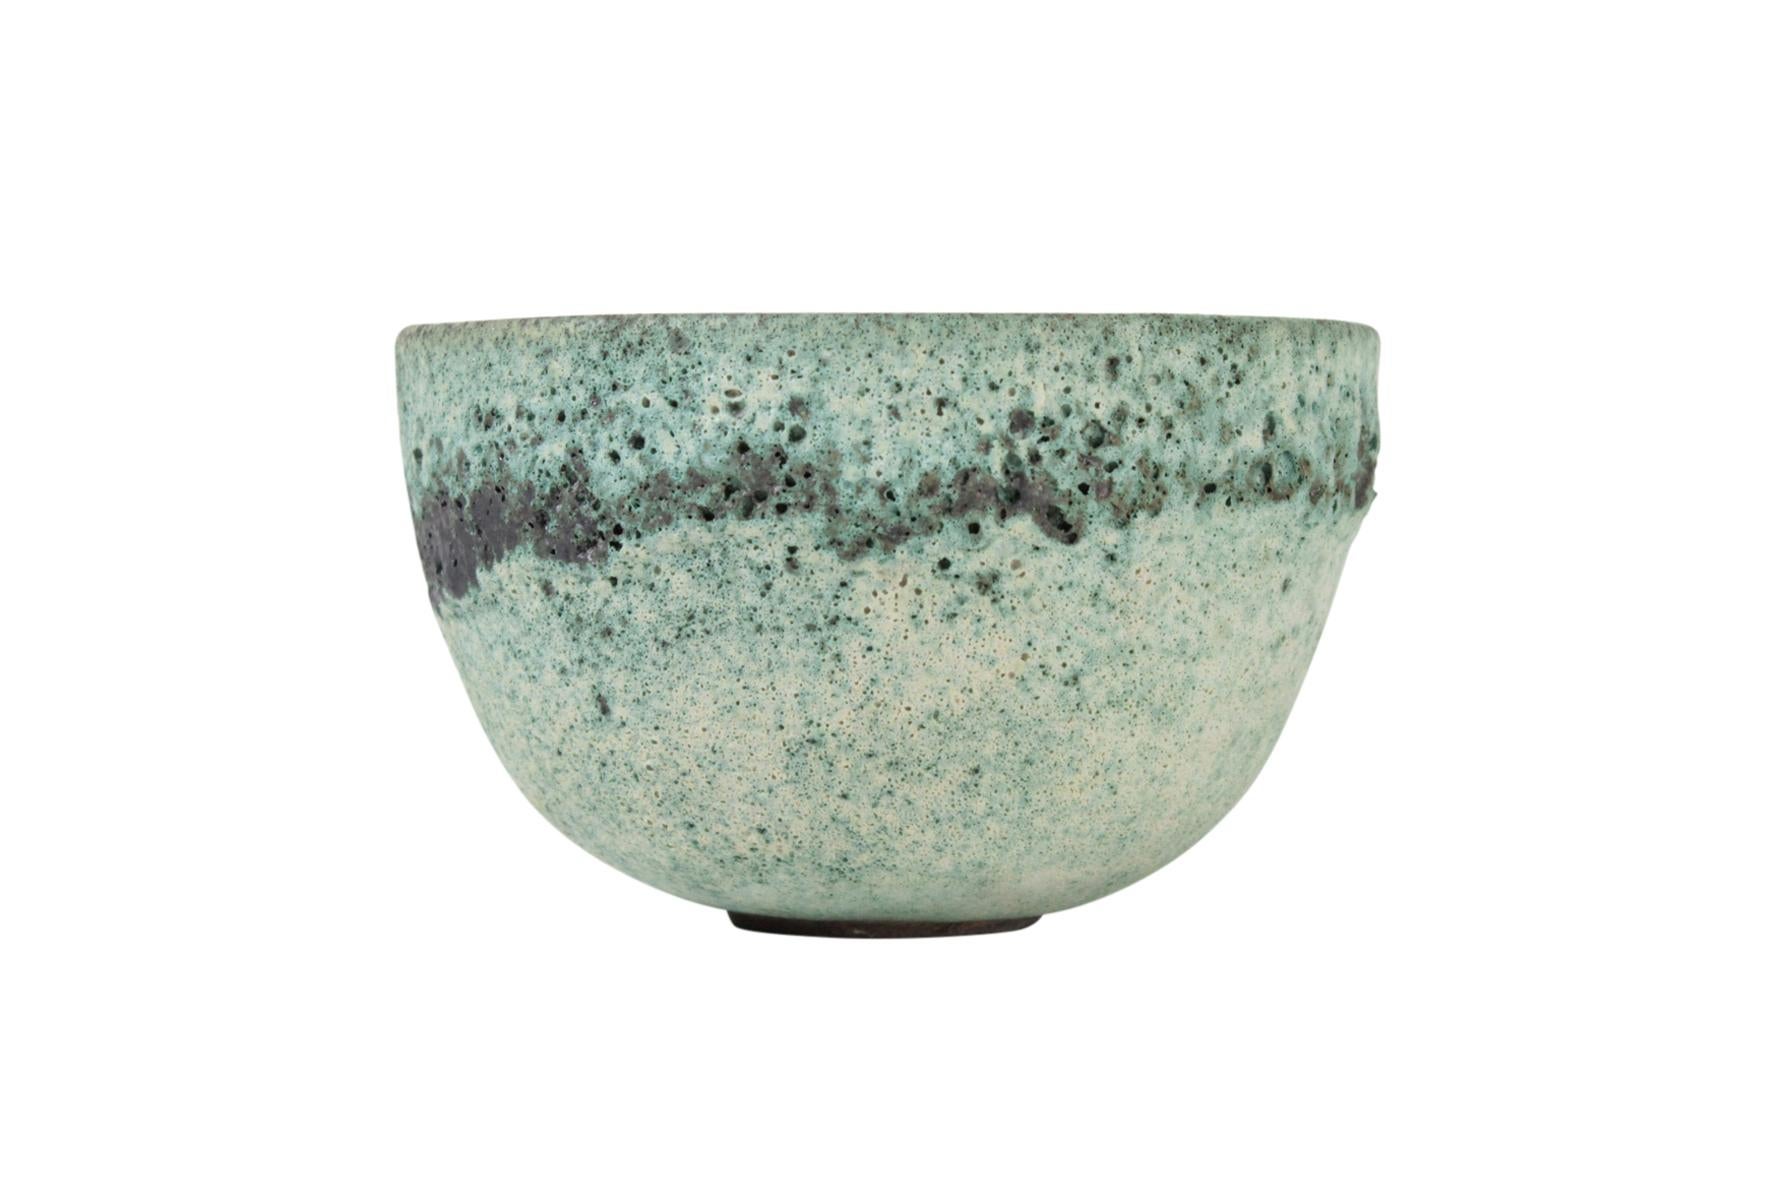 James Lovera Studio pottery bowl in a green crater glaze. Signed.